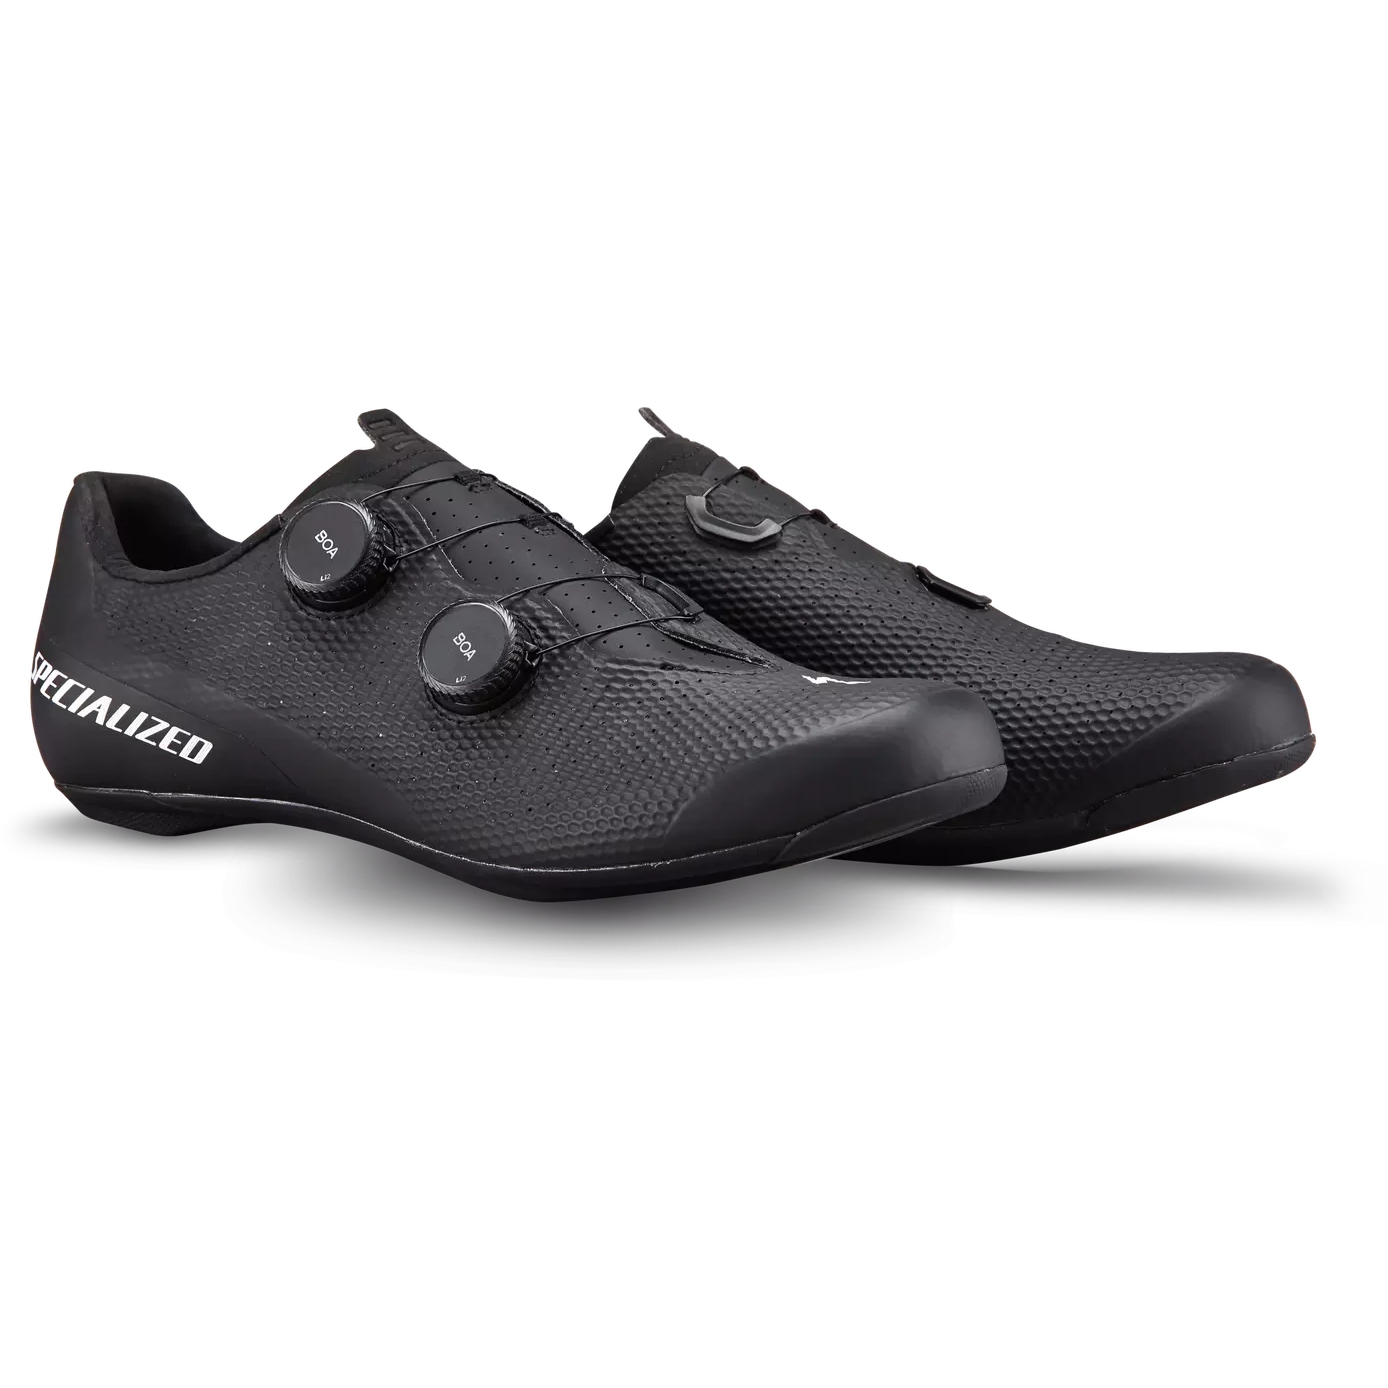 Image of Specialized Torch 3.0 Road Shoes - Black